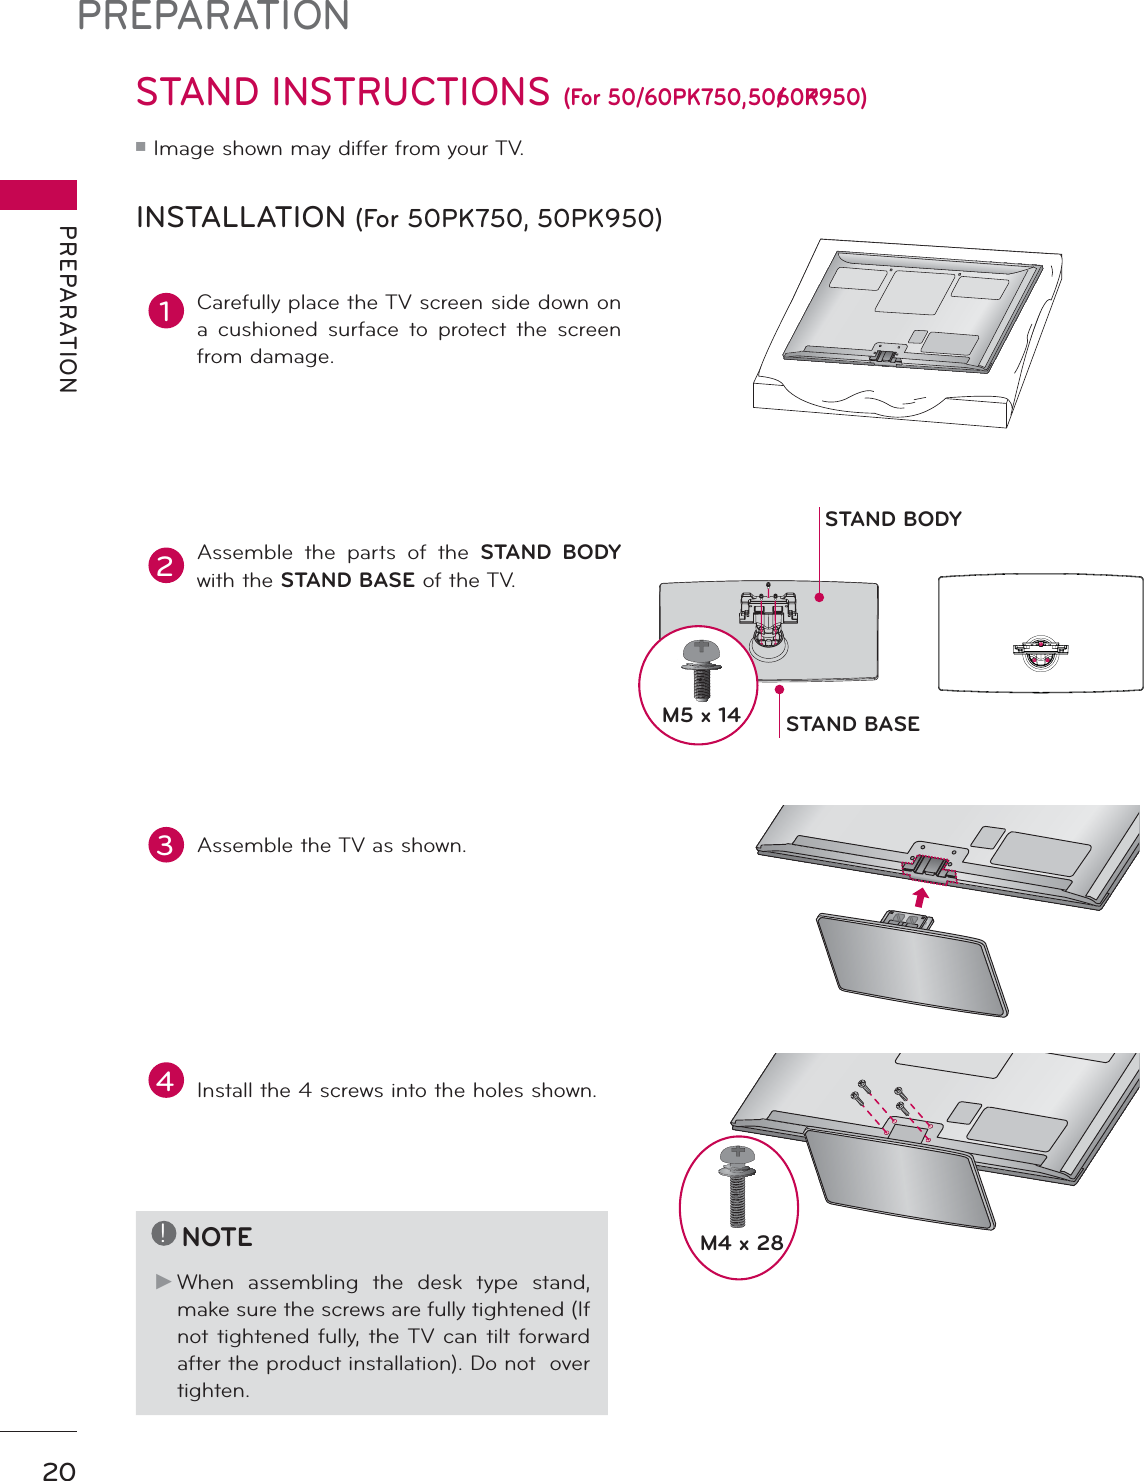 PREPARATIONPREPARATION20STAND INSTRUCTIONS (For 50/60PK750, 50/60PK950)ᯫImage shown may differ from your TV.INSTALLATION (For 50PK750, 50PK950)!NOTEŹWhen assembling the desk type stand, make sure the screws are fully tightened (If not tightened fully, the TV can tilt forward after the product installation). Do not  over tighten.1Carefully place the TV screen side down on a cushioned surface to protect the screen from damage.2Assemble the parts of the STAND BODYwith the STAND BASE of the TV.3Assemble the TV as shown.4Install the 4 screws into the holes shown.STAND BASESTAND BODYM5 x 14M4 x 28